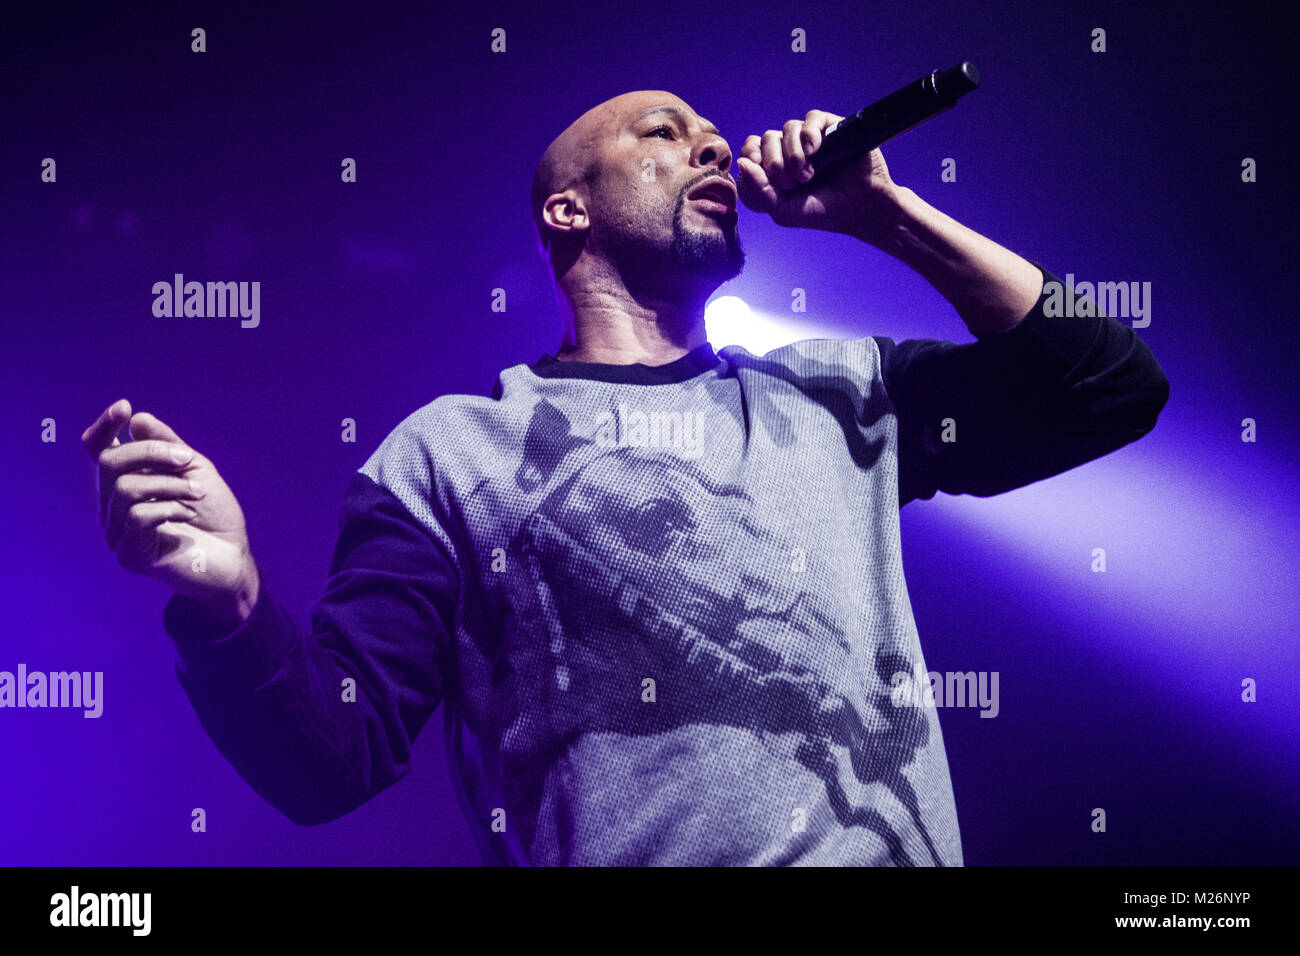 The American rapper, songwriter and hip hop recording artist Lonnie Rashid Lynn Jr. is better known by his stage name Common (formerly Common Sense). Here he performs a live concert at Vega in Copenhagen. Denmark, 14/11 2014. Stock Photo